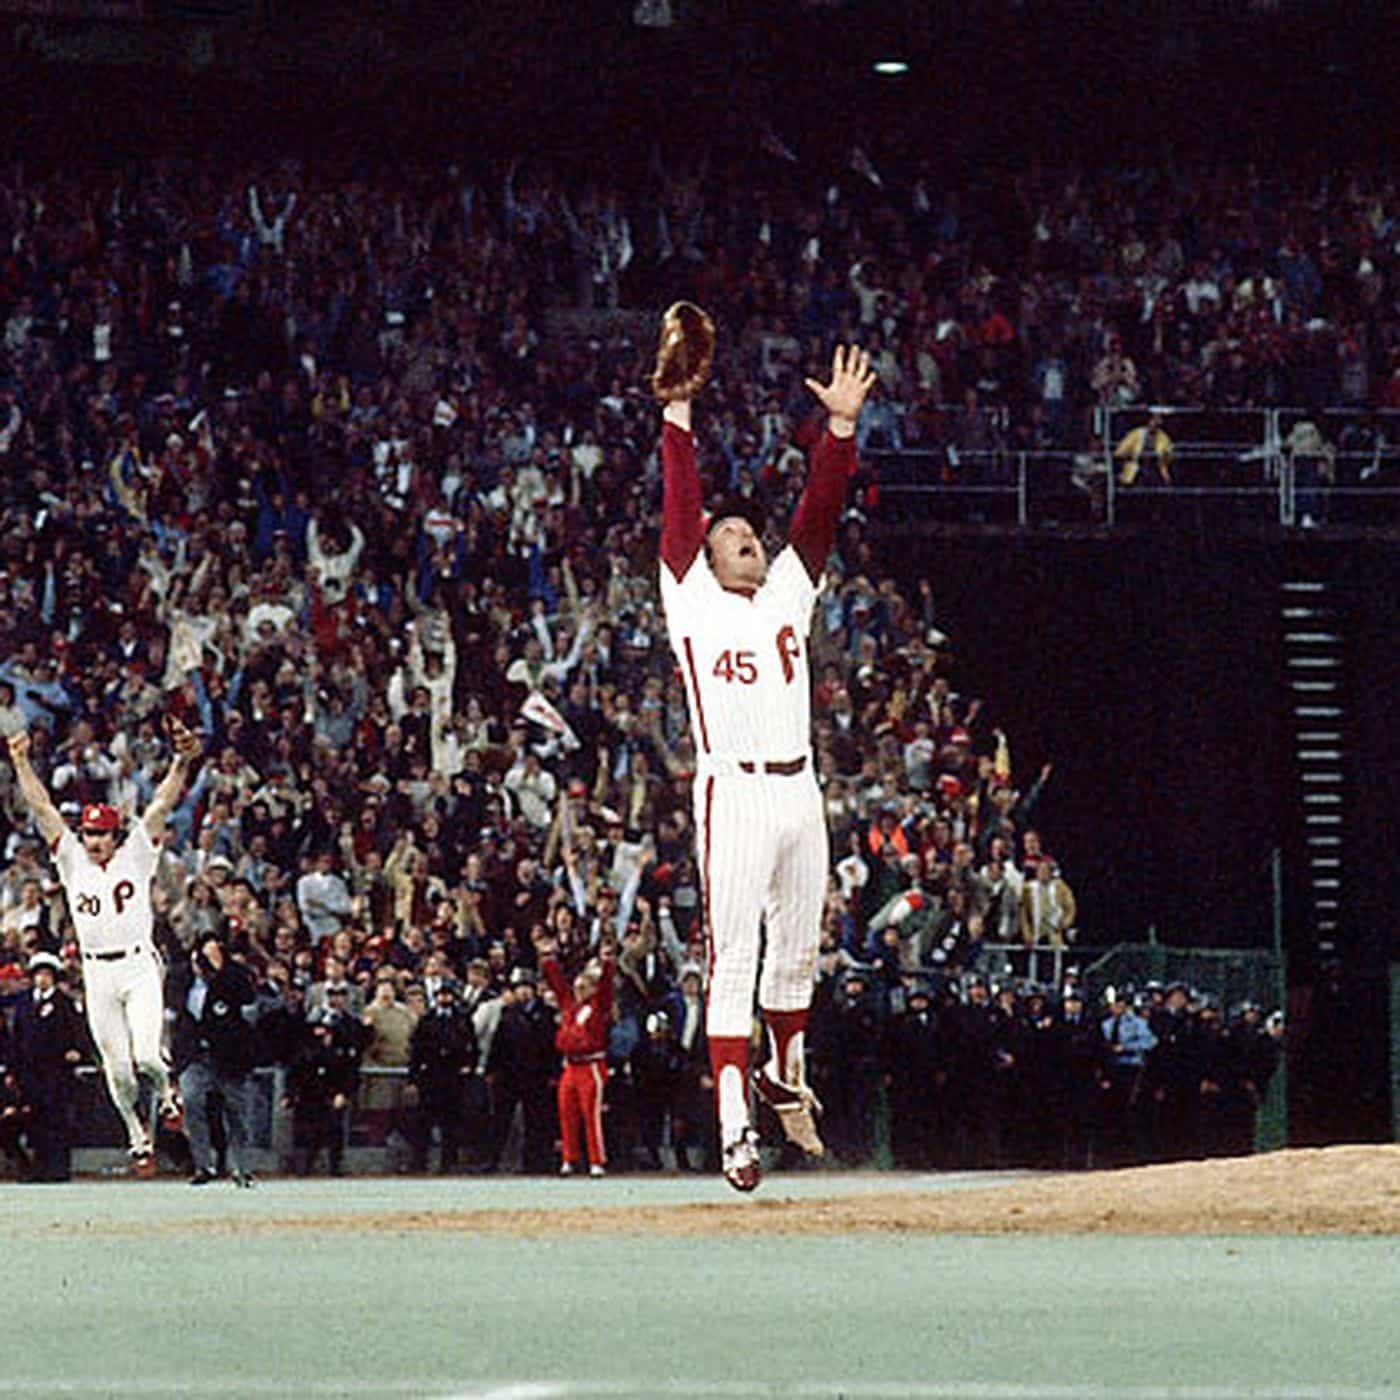 phillies 1980 world series champs